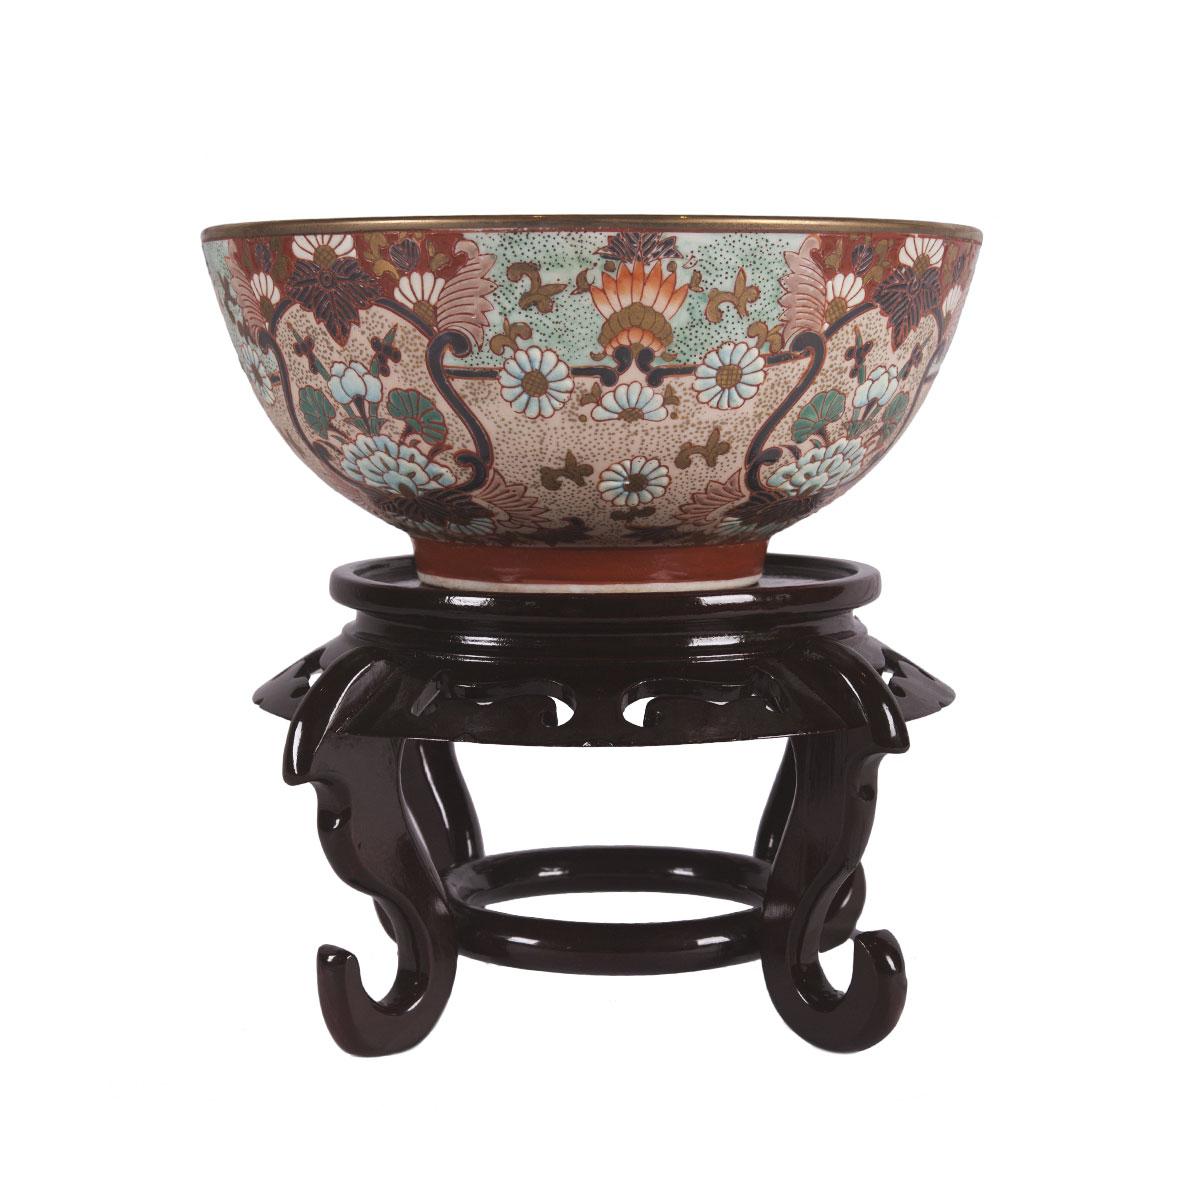 This Imari style bowl from China is hand painted and made of porcelain. This bowl includes the wooden stand shown in the photos. The bowl measures 10 inches in height and is 10 inches in diameter. The bowl is 10 inches in depth. 